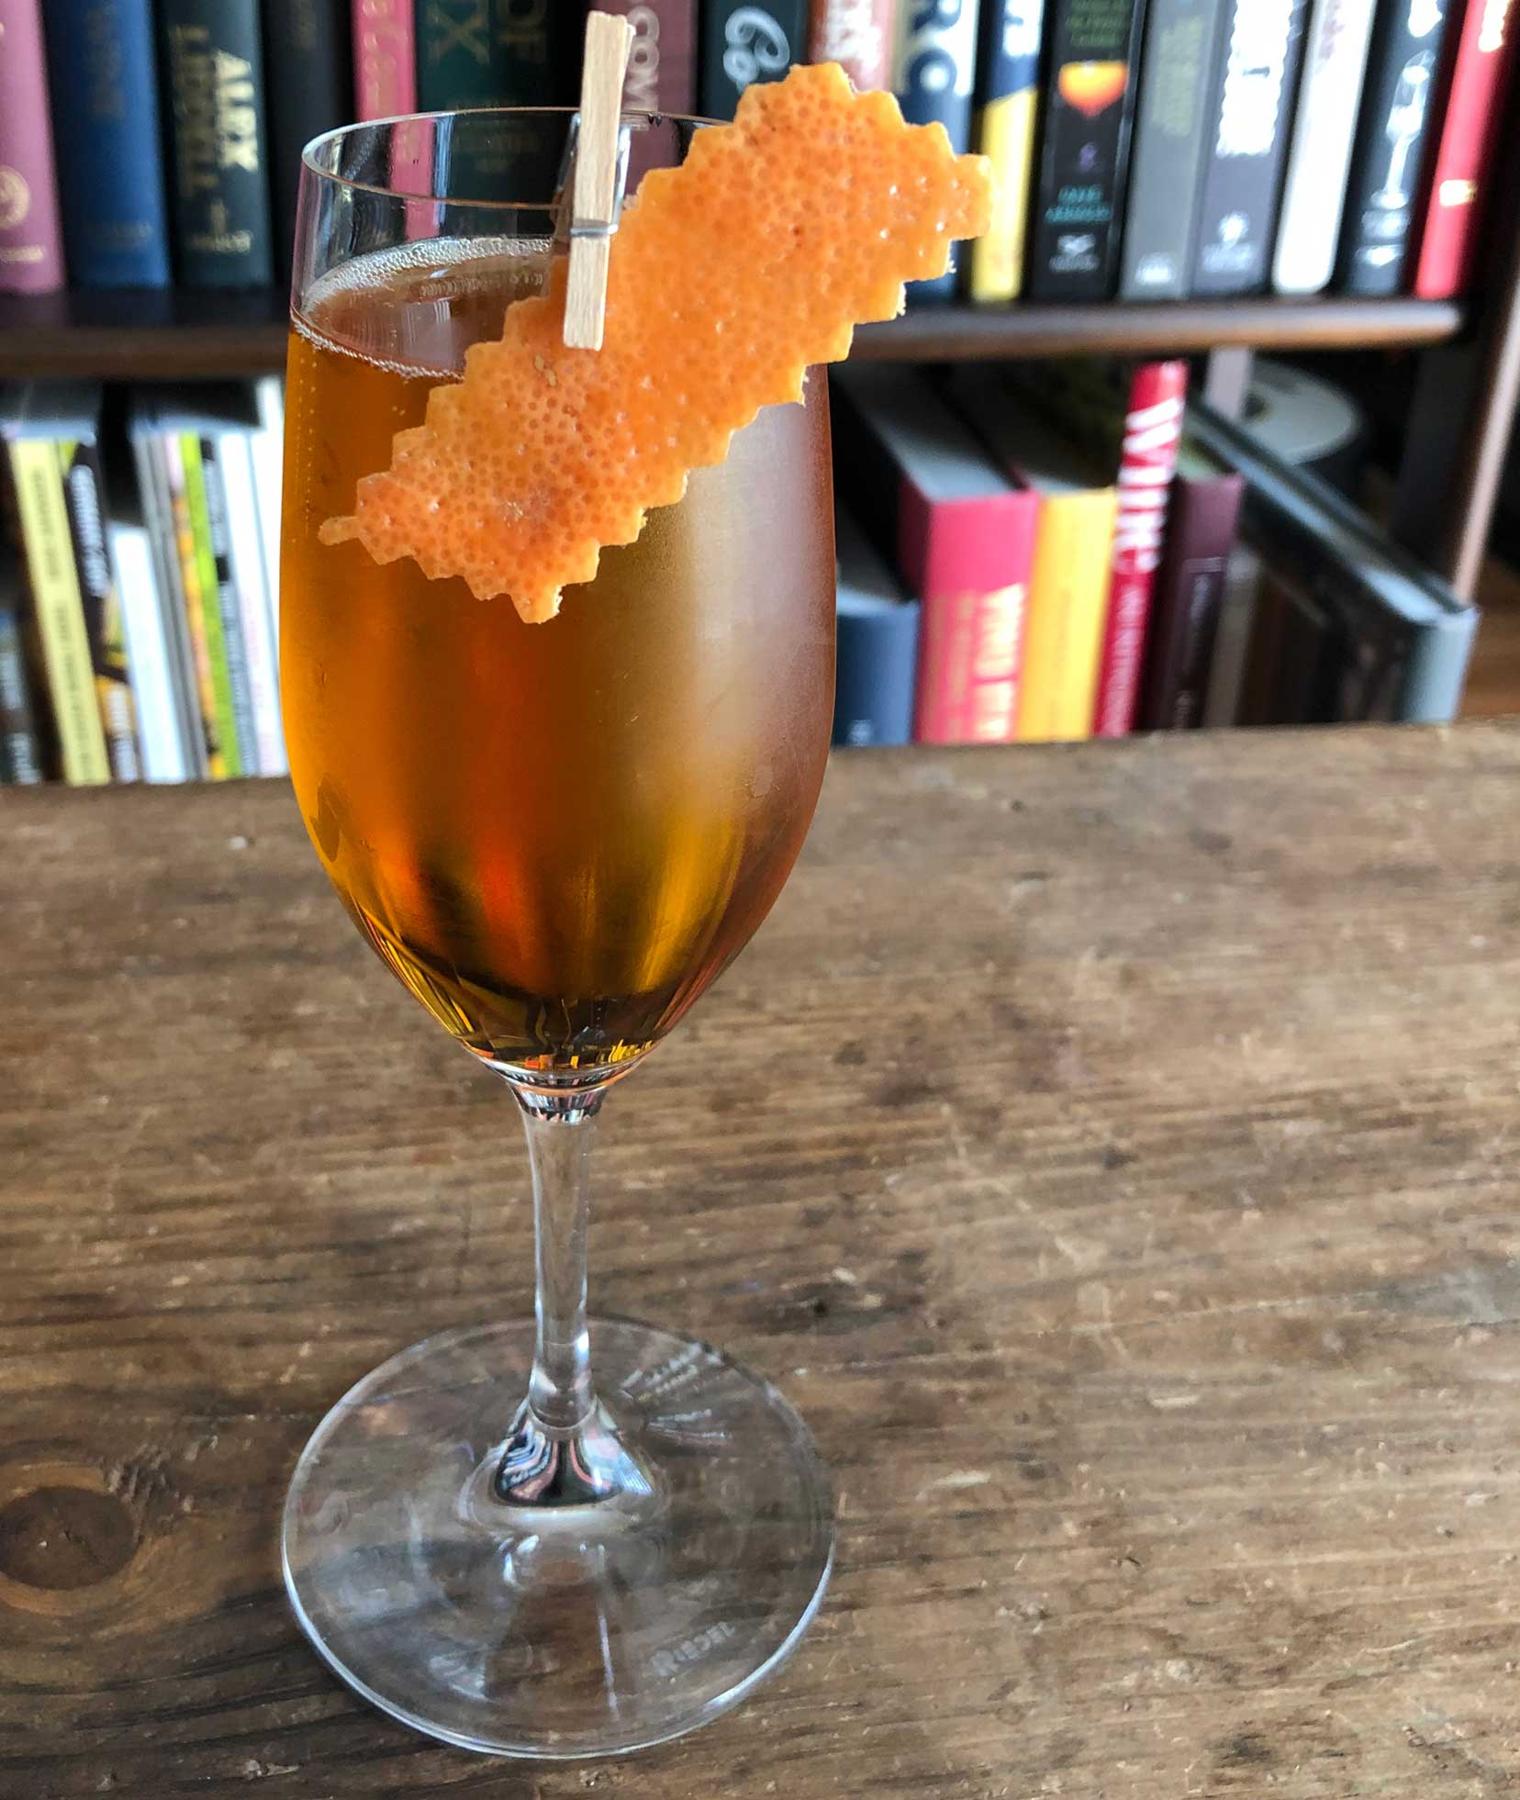 An example of the Champagne Supernova, the mixed drink (drink) featuring Cocchi Asti DOCG, Rothman & Winter Orchard Apricot Liqueur, Elisir Novasalus, and grapefruit twist; photo by Lee Edwards